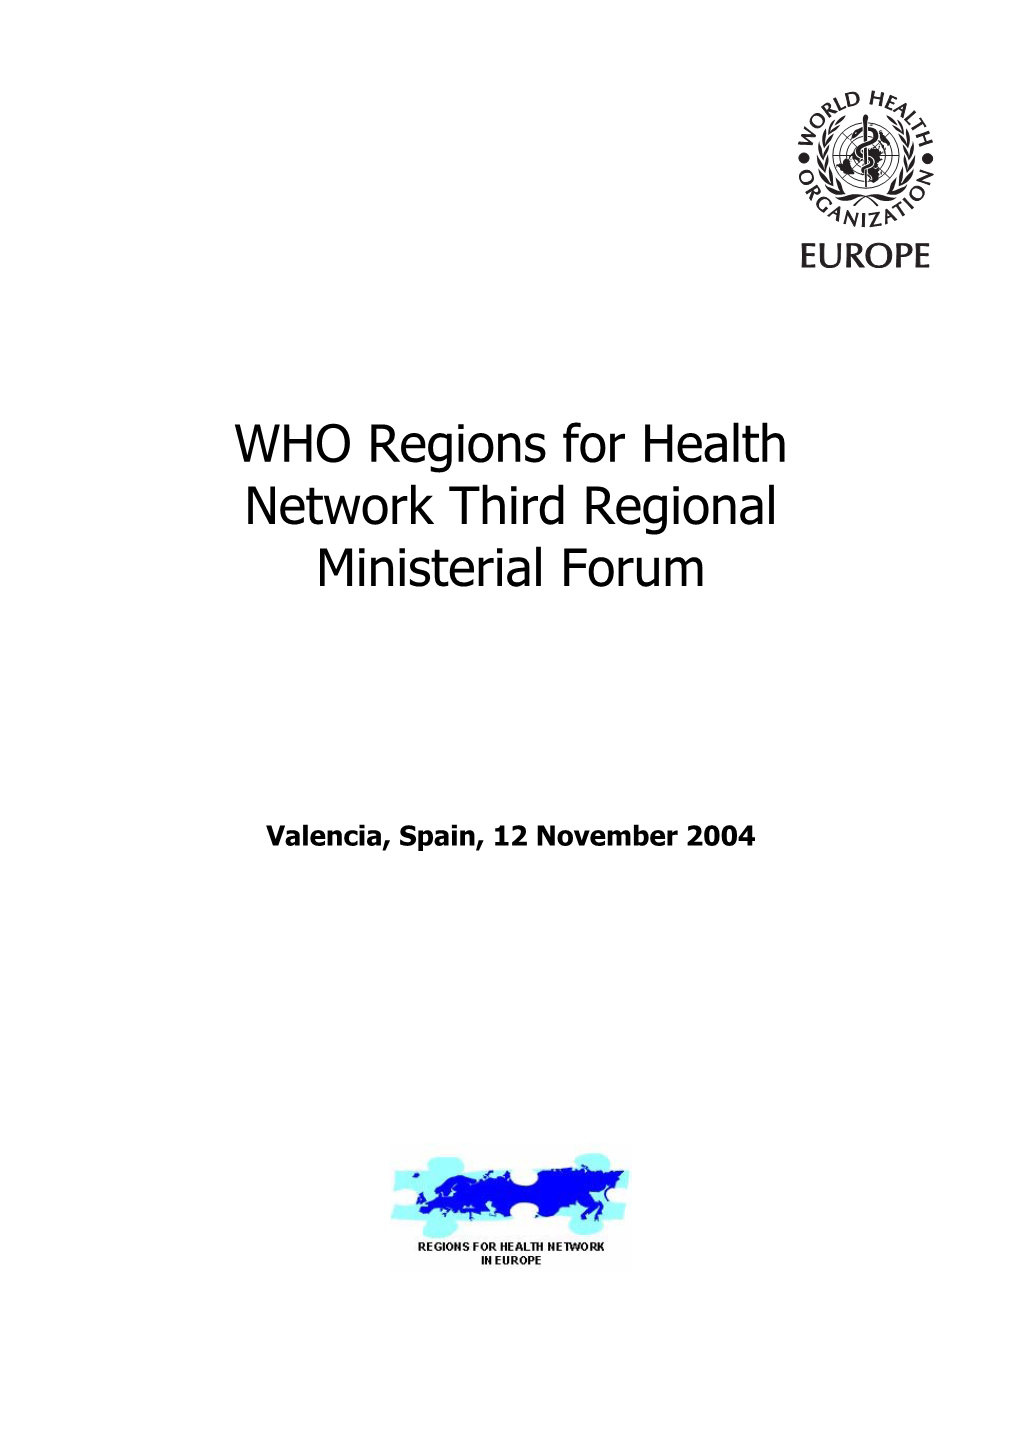 WHO Regions for Health Network Third Regional Ministerial Forum